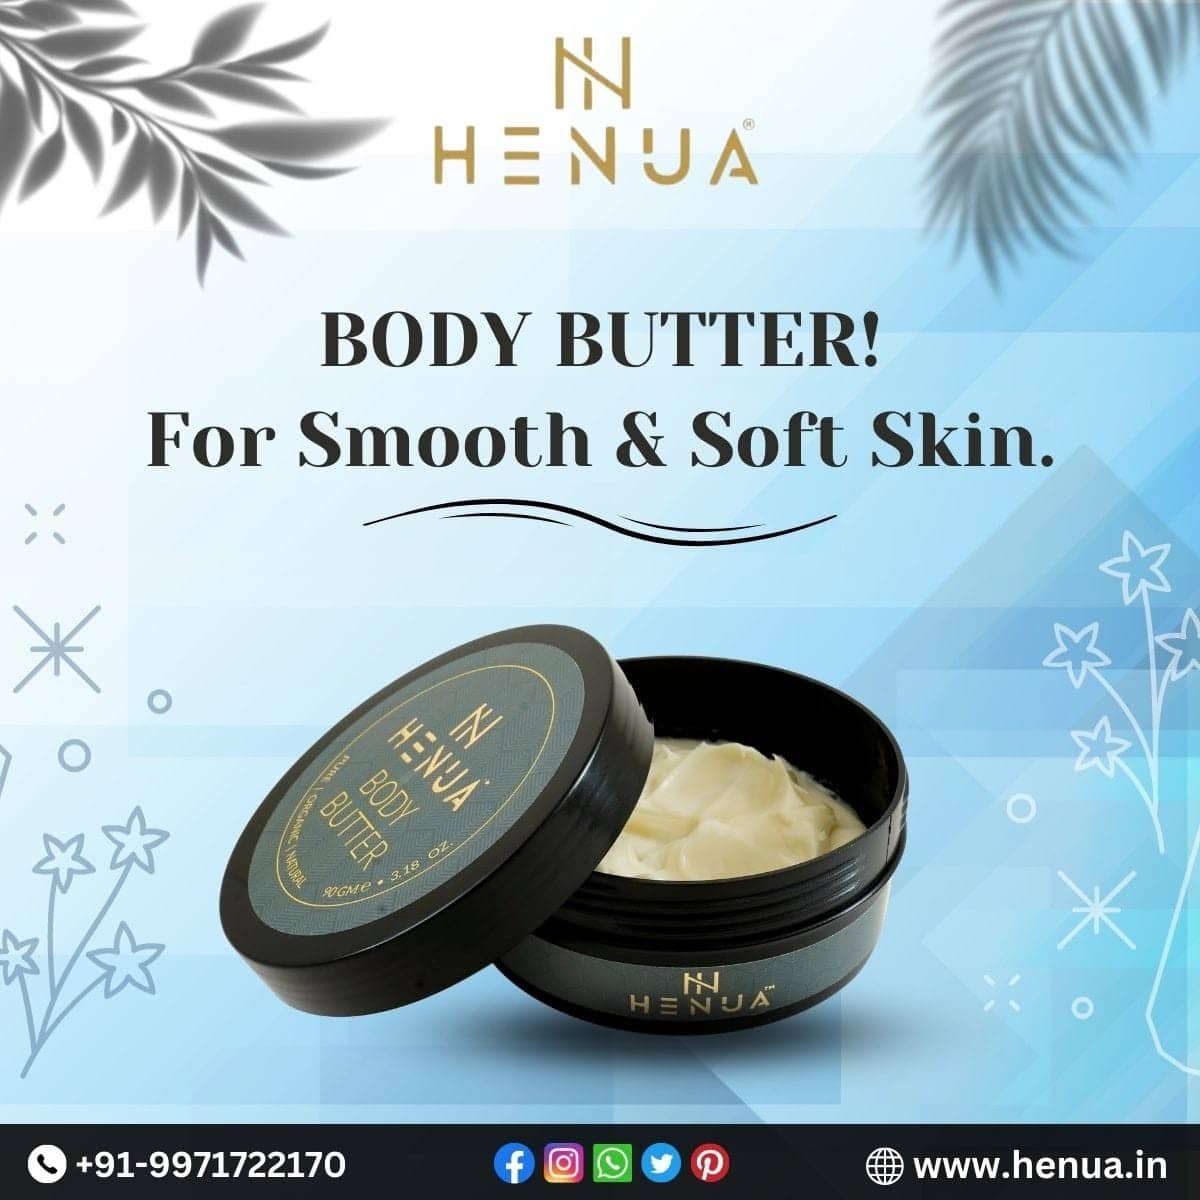 Get-Soft-And-Smooth-Skin-With-Henua-Body-Butter